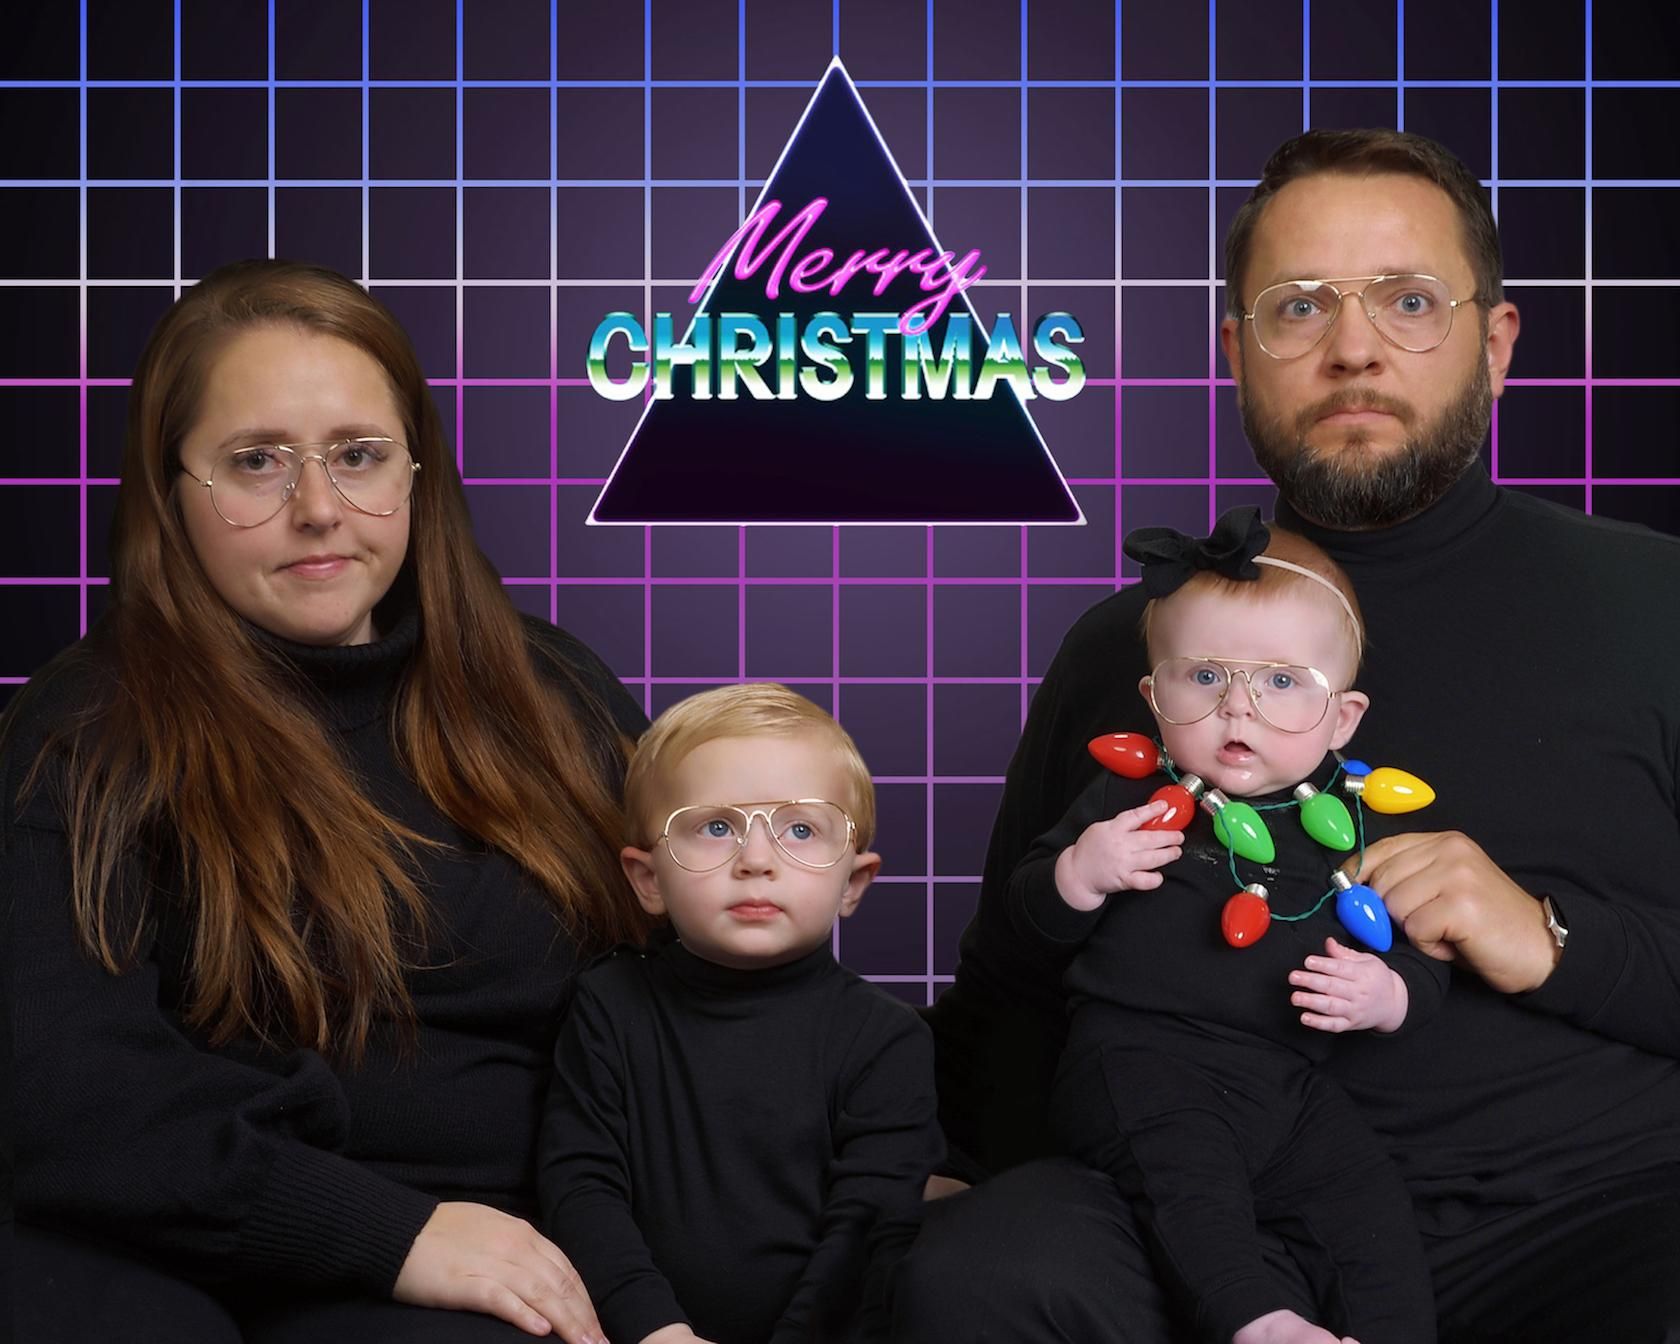 Did our Christmas Card in 10 minutes at JCPenney